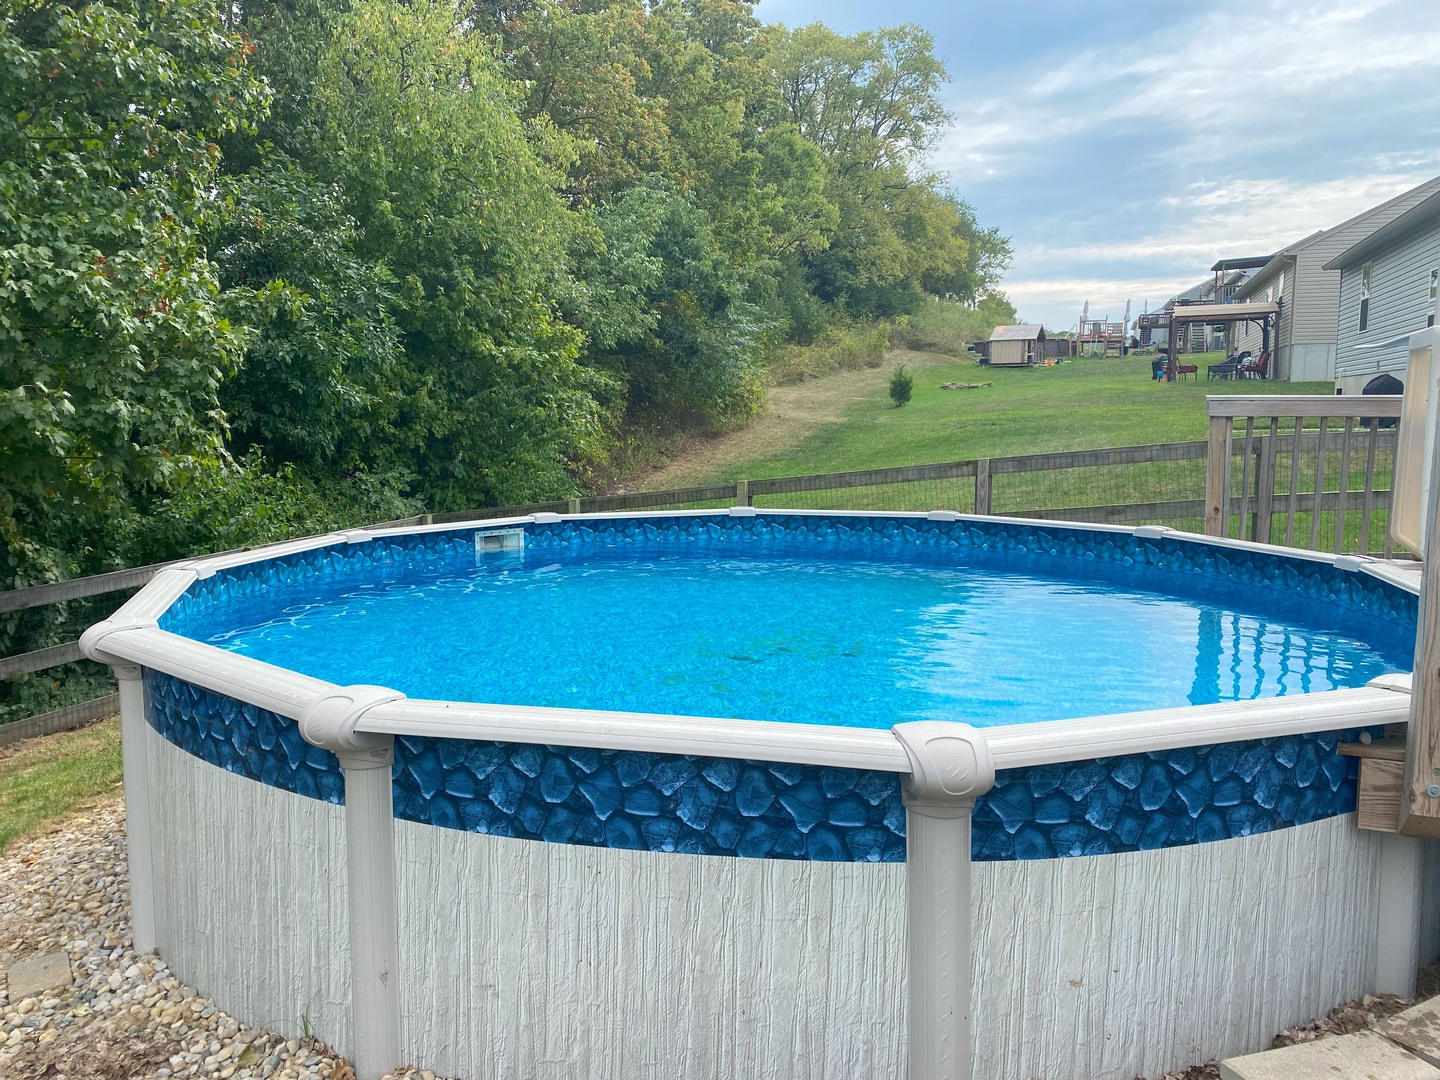 Make a splash out back in the seasonally-available pool!